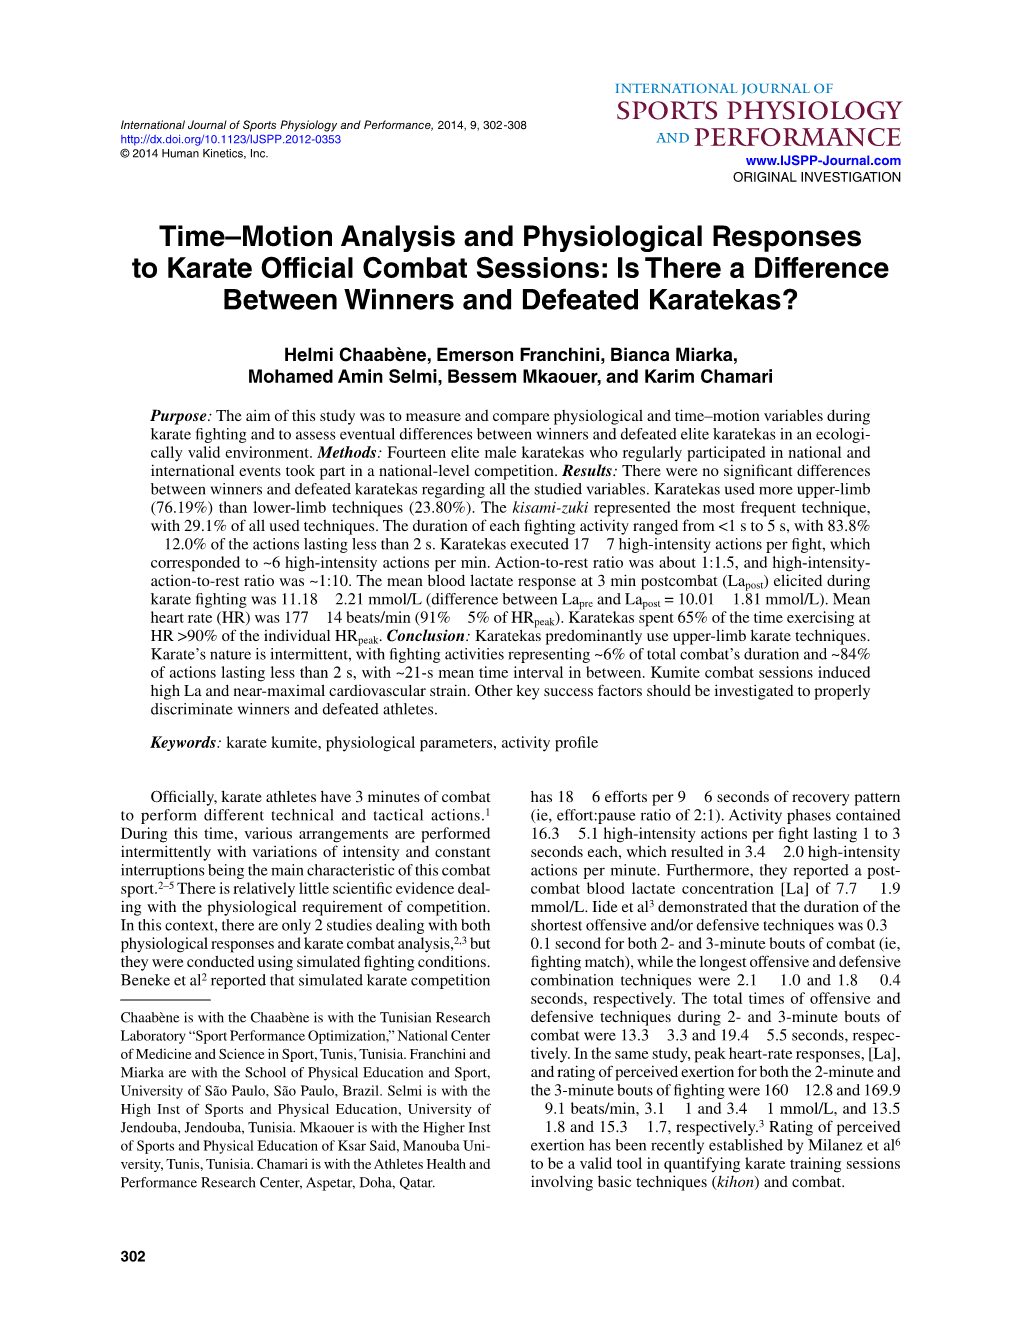 Time–Motion Analysis and Physiological Responses to Karate Official Combat Sessions: Is There a Difference Between Winners and Defeated Karatekas?